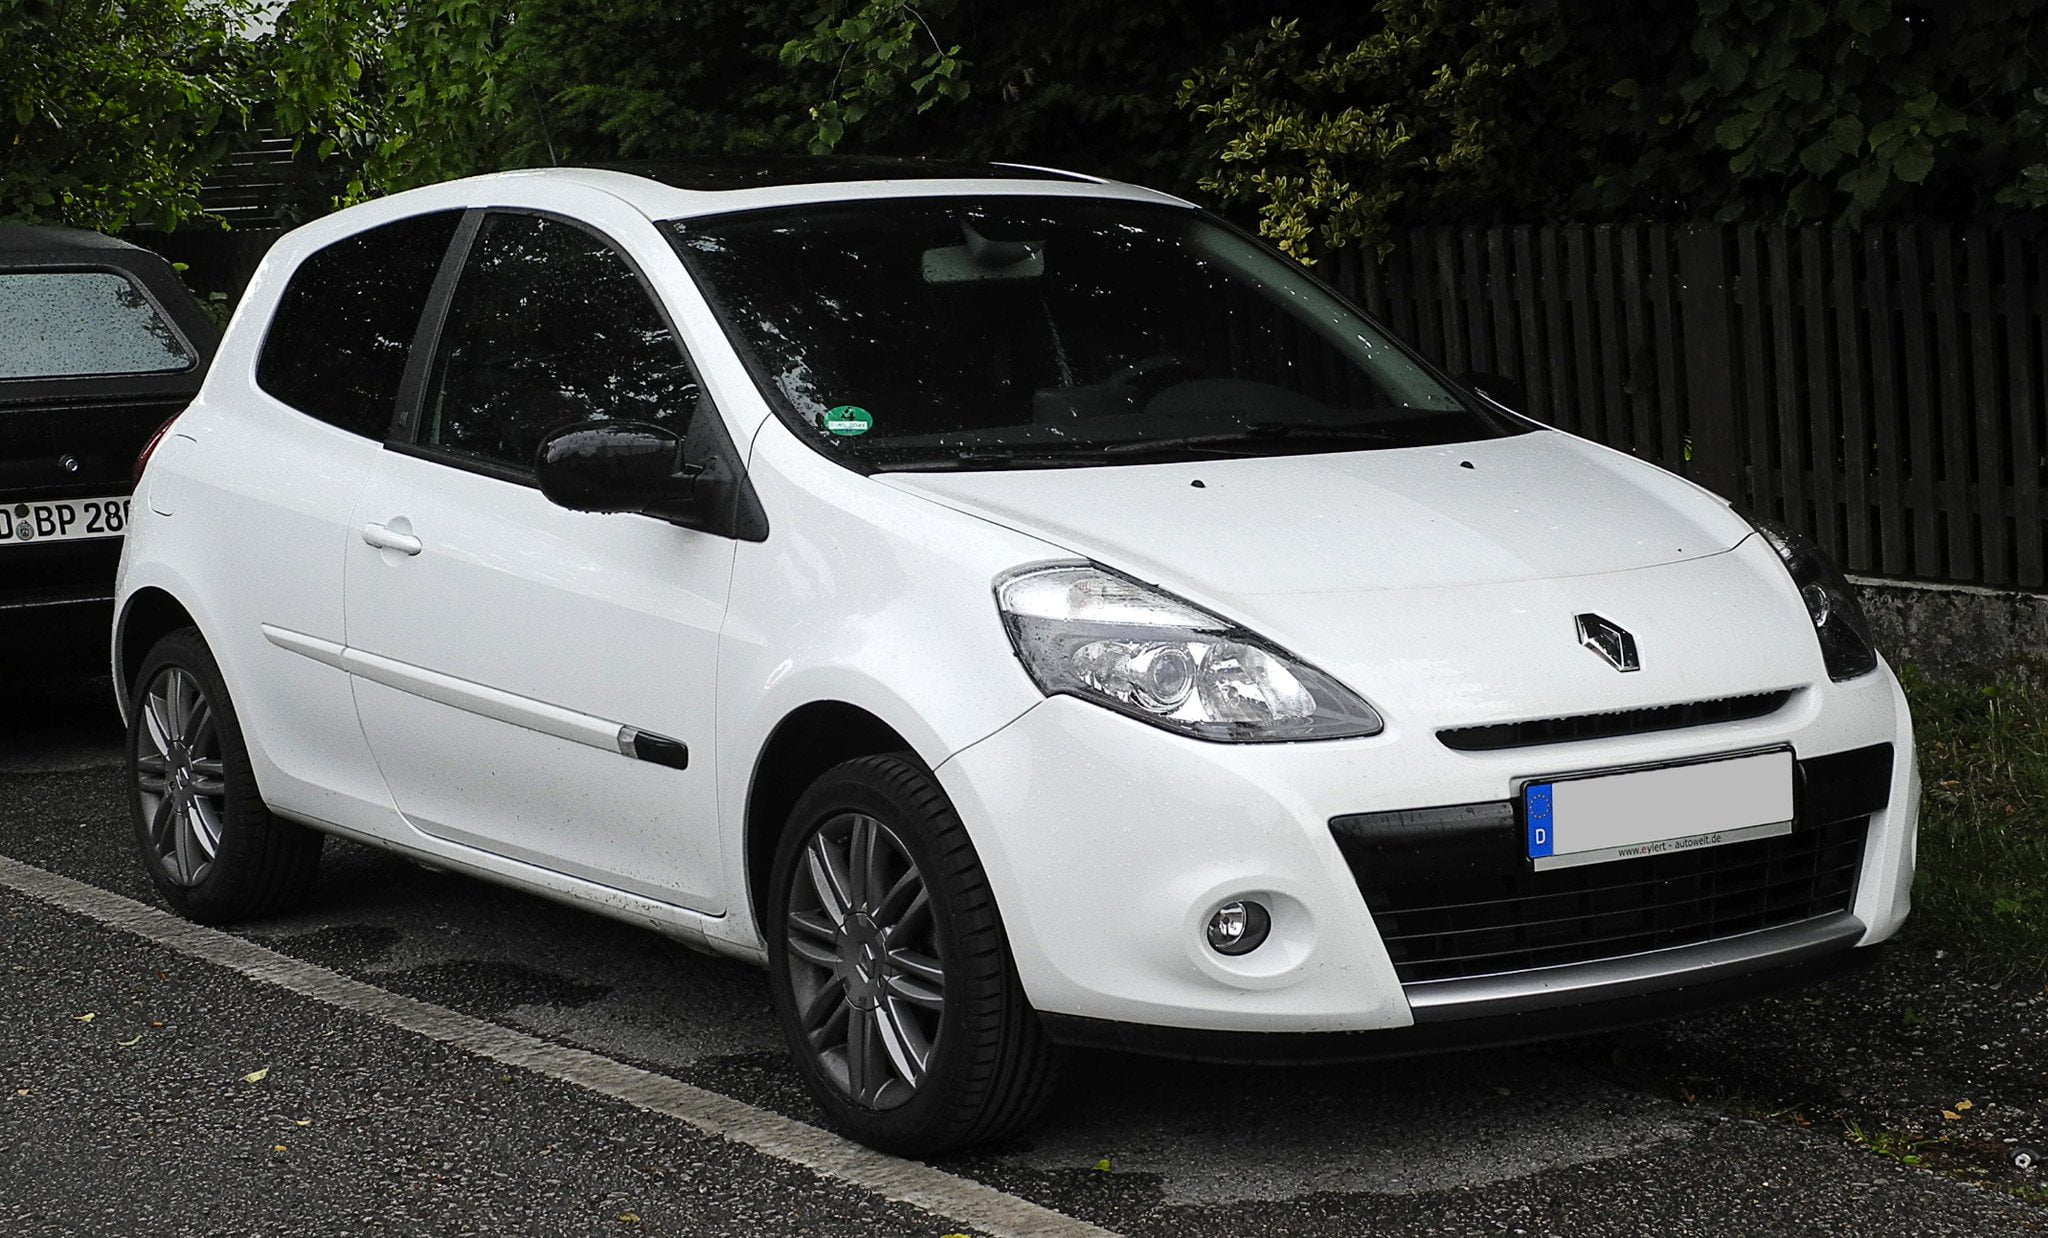 Renault Clio 20th III Facelift Frontansicht 11. Juni 2011 Wulfrath